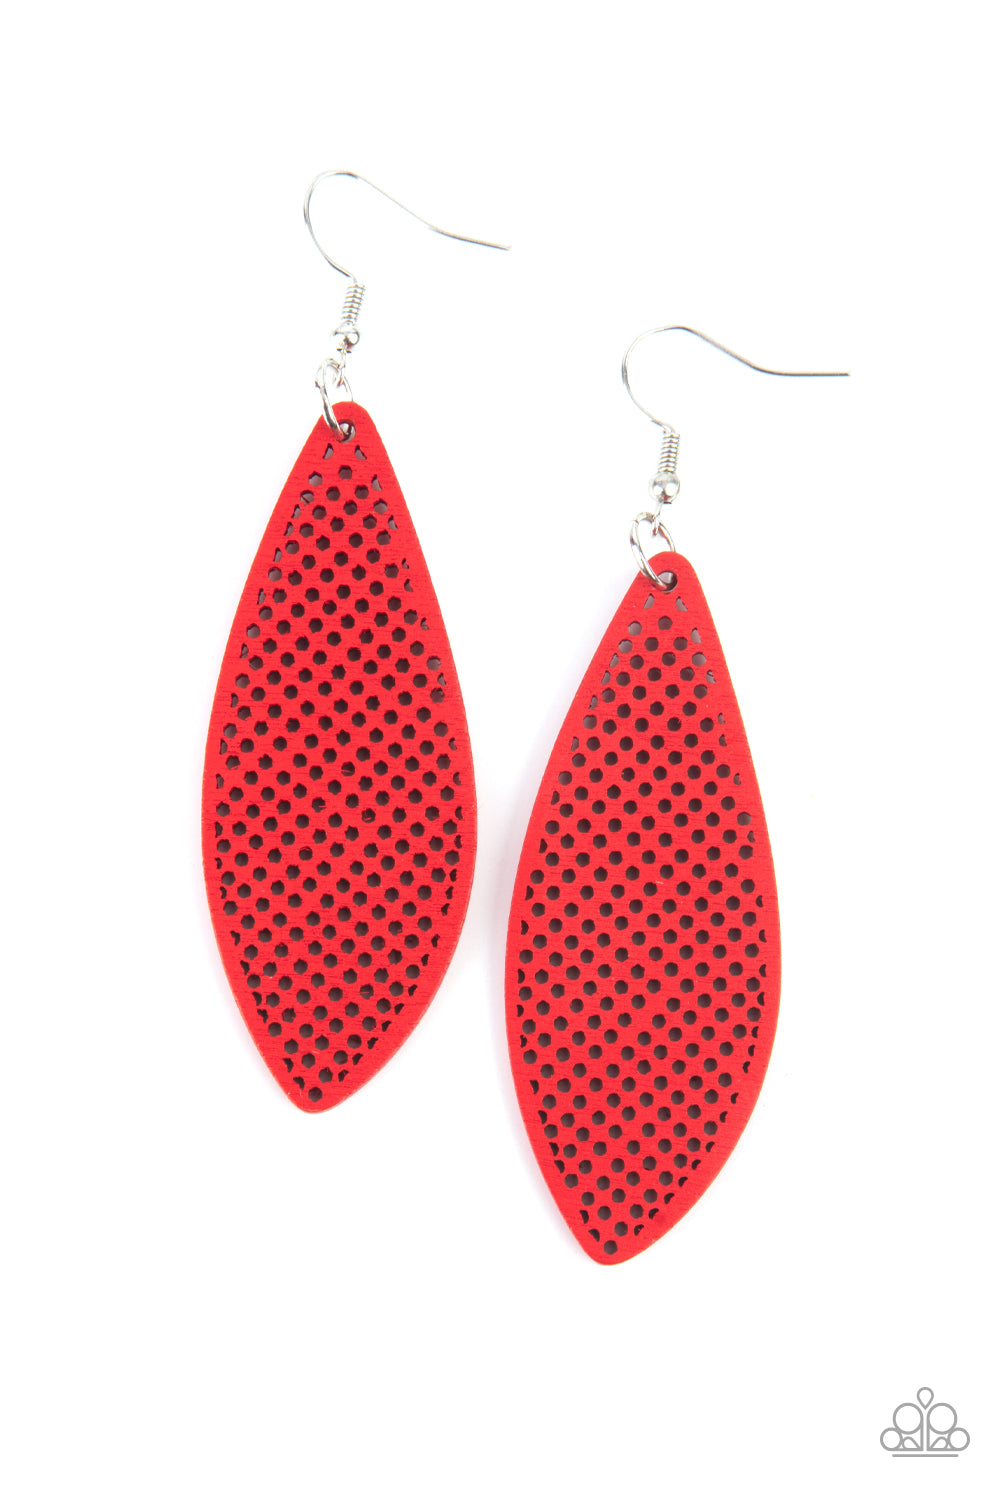 Paparazzi Accessories - Surf Scene #E508 - Red Earrings